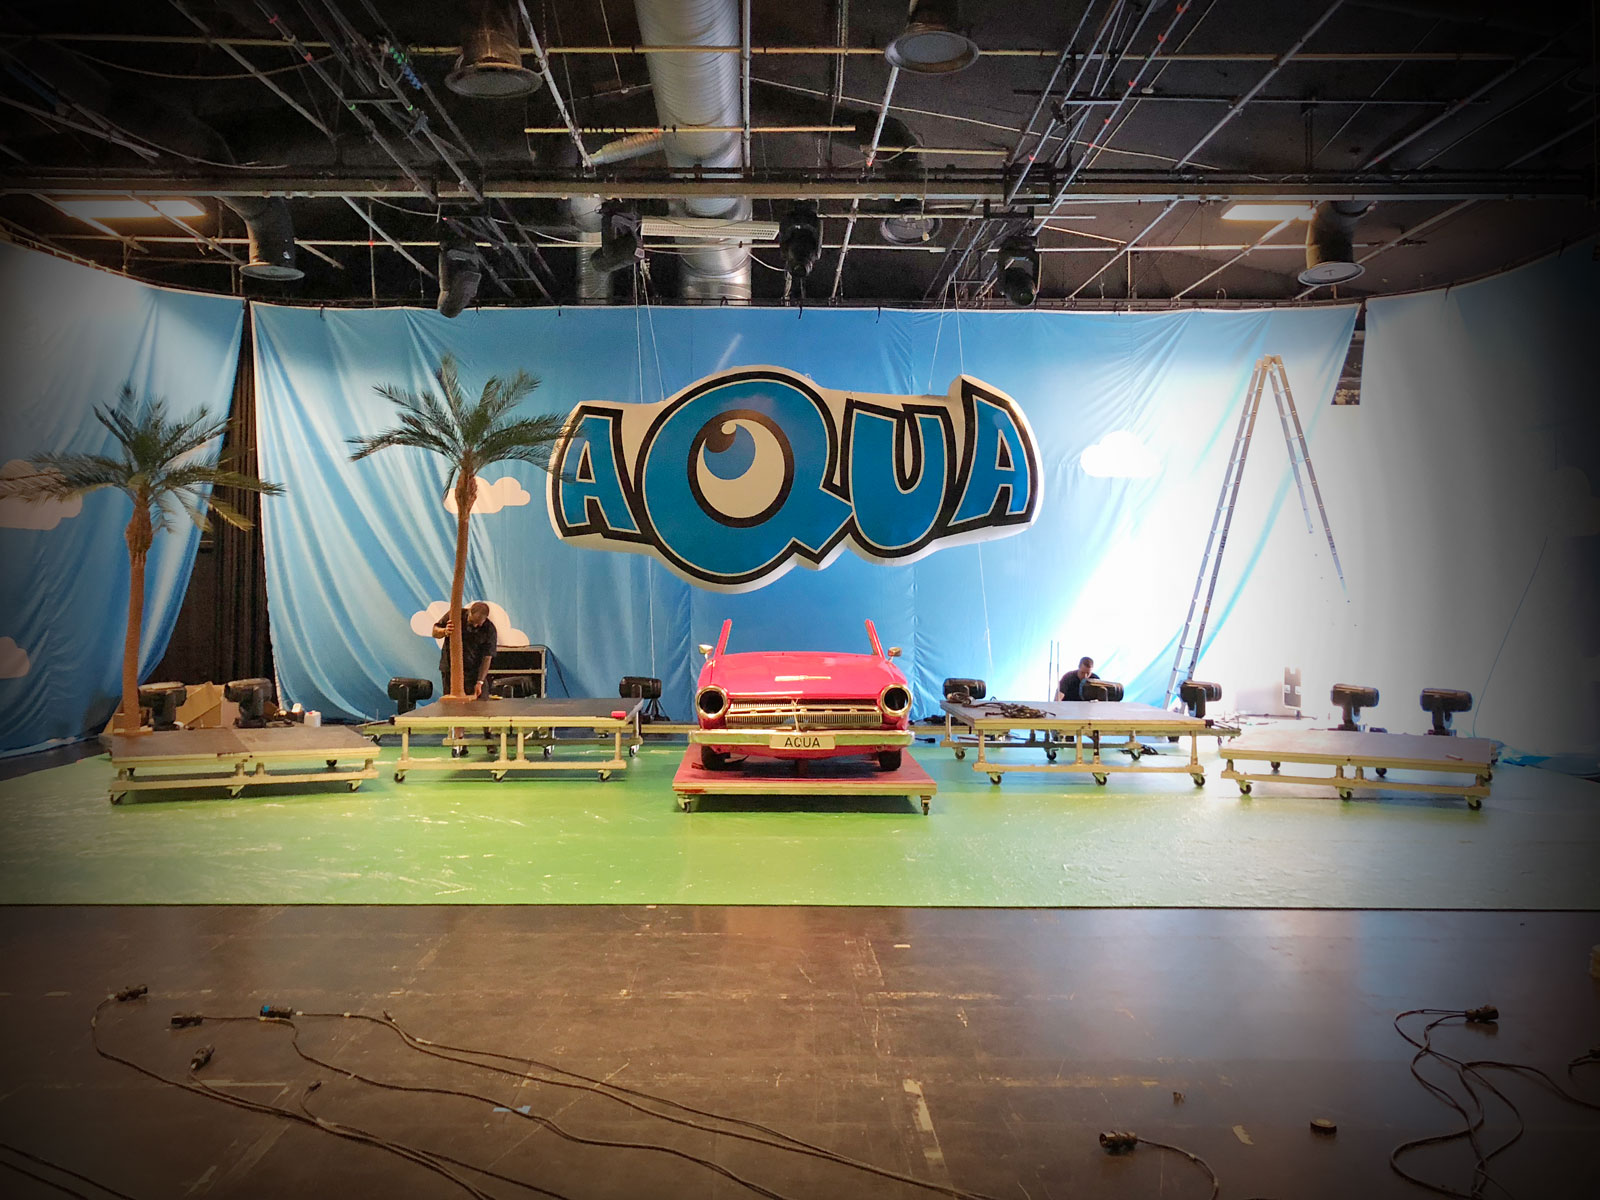 AQUA's logo used as a giant inflatable stage prop